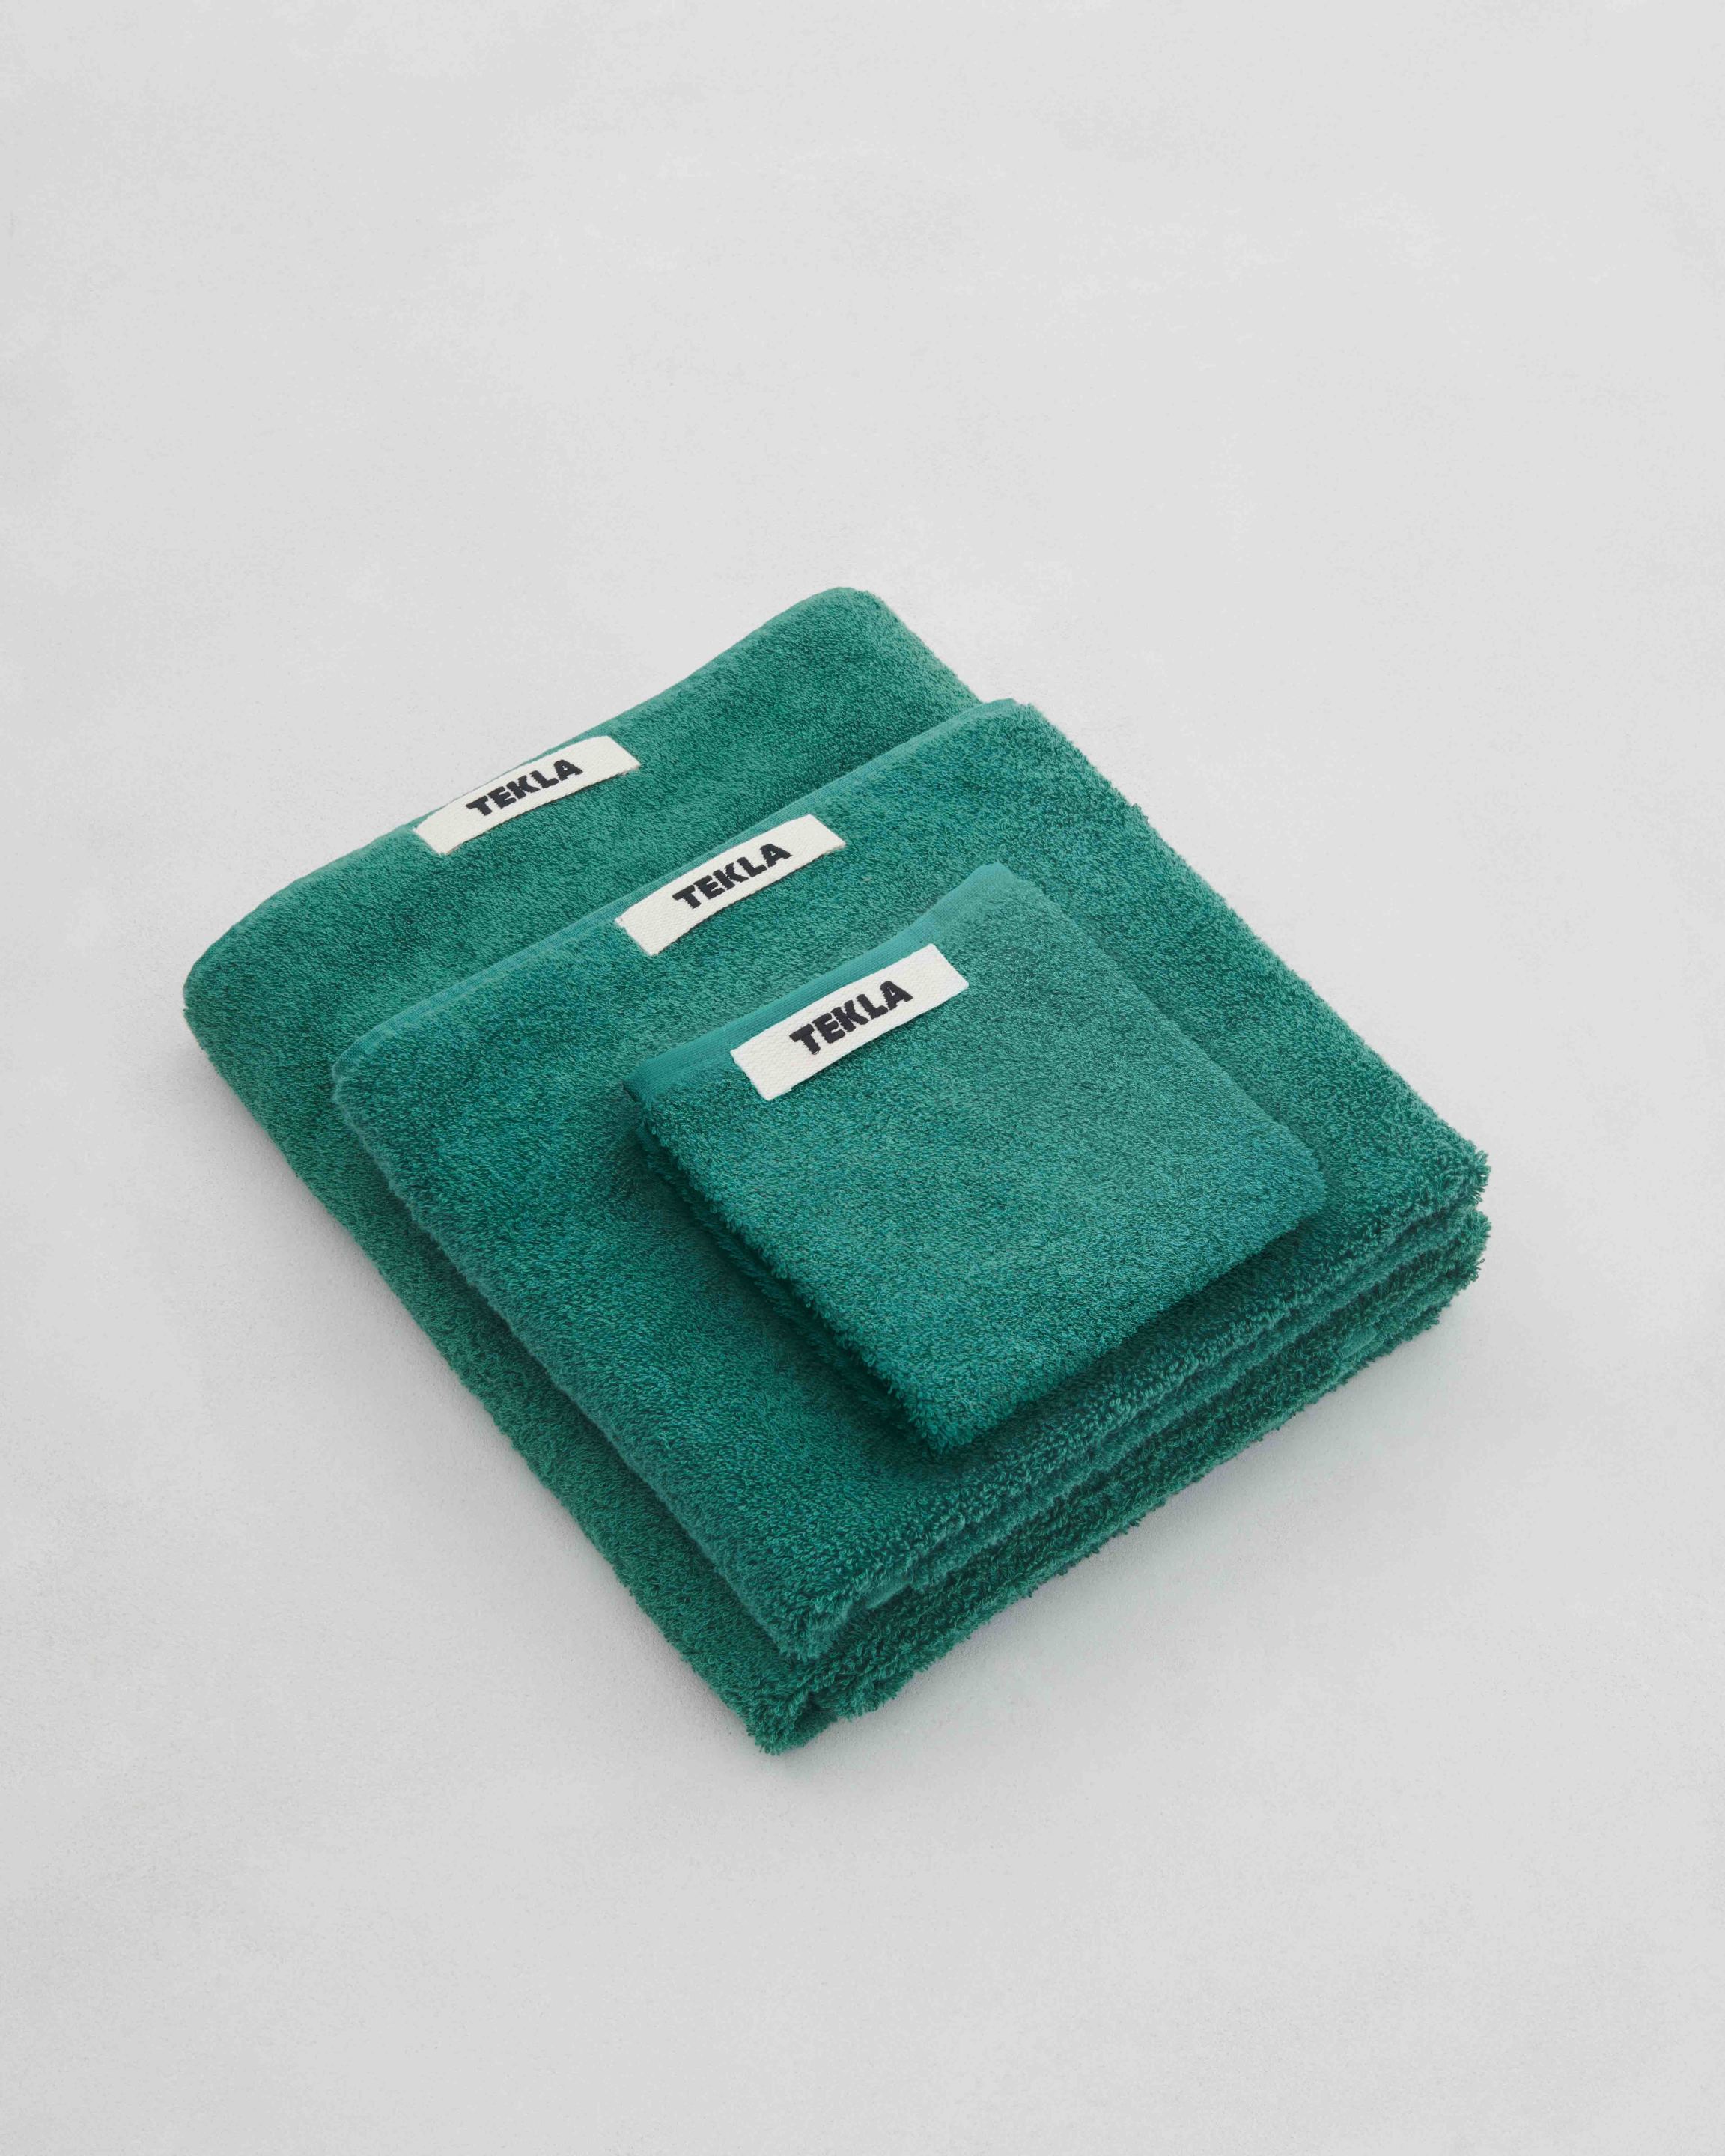 Terry Towel - Teal Green